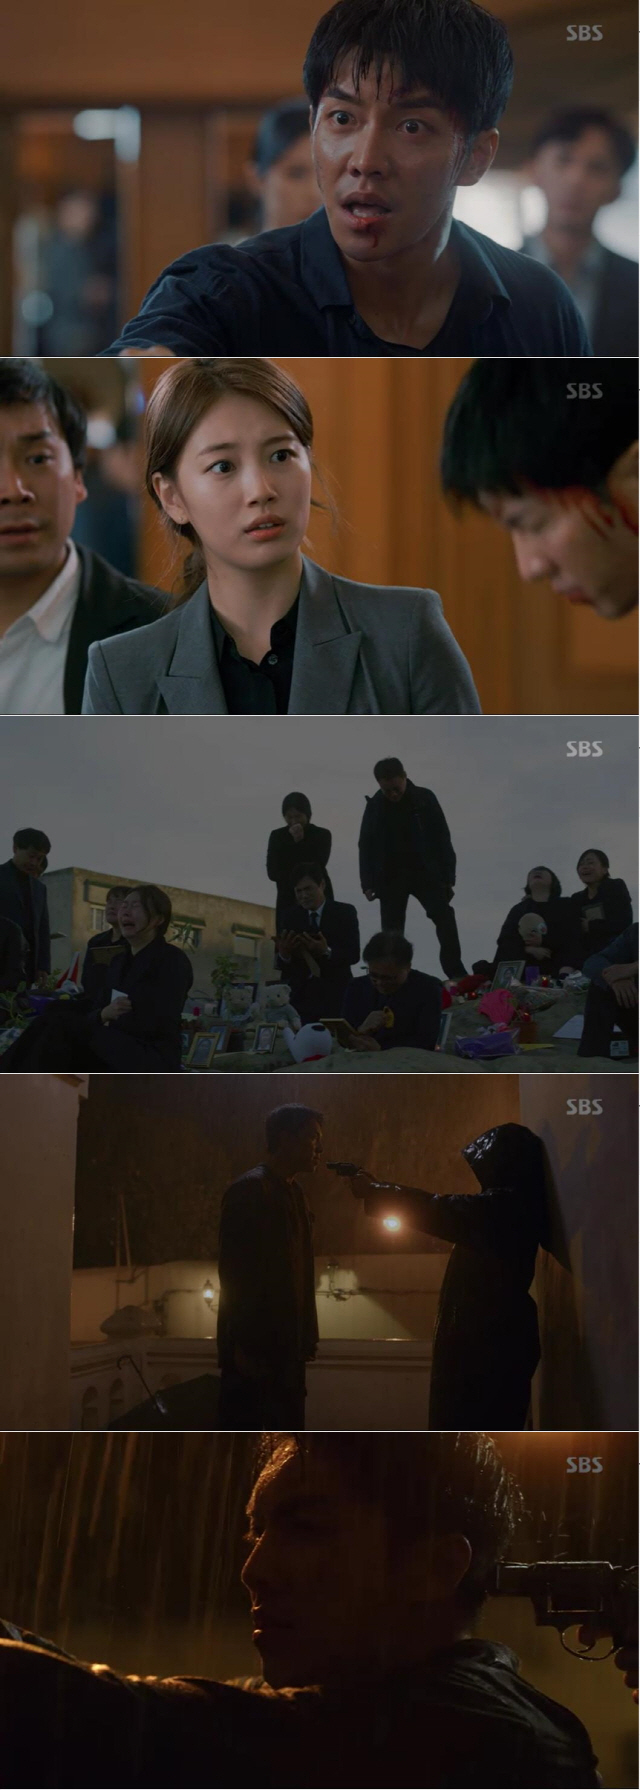 Its not an accident, its a terror, Im sure!In the SBS gilt drama Vagabond, Lee Seung-gi and Bae Suzy opened the Dawn of the Planet of the Appearance, intuition that the civil airliner Fall accident was the work of a terrorist.In the second episode of Vagabond broadcast on the 21st, Cha Dal-gun and Bae Suzy showed a gut feeling that there was a terrorist behind the fall accident of a civil-commodity passenger plane.Civilian stuntman Cha Dal-gun and NIS Black agent Goh Hae-ri wondered whether they would start full-scale cooperation with each other in order to find the truth hidden in the passenger plane Fall accident that caused many casualties.In the play, Cha Dal-geon missed Jerome (Yoo Tae-oh), who is suspected of being a suspect for a terror, in front of his eyes and was in a rage.At the same time, while the bereaved families met Edward Park, CEO of Dynamic Systems, a passenger plane manufacturer who was Falling to solve the compensation problem, Cha Dal-gun appeared and said, Planes is Fall, but there is a lively young man.They checked CCTV to find out if the man in SoundCloud and the man who met Chadalgun were the same person, but the man in the video was a person other than Jerome, and Chadalgun was stunned and shouted CCTV was manipulated, but no one, including Ko Hae-ri, believed Chadalgan.Chadalgan returned to the hotel, saved videos of SoundCloud on USB, and then stepped out to deliver them to the confessional.At this time, someone in a black raincoat sneaked in and tried to open a safe containing Chadalgans The Notebook.In the meantime, when he arrived at the Gohari accommodation, he tried to climb the drain when he did not respond, and found that the moment he pointed a gun at his back.Cha Dal-gun shot him, Are you with him? He quickly snatched the gun of the Gohari and reversed the charter, mistaking the Gohari for being one of the terrobum, pointing the gun at the forehead of the Gohari, and began to search the hostel.However, through the phone call of Min Jae-sik (Jung Man-sik), the director of the NISs 7th director, who was called at that time, he learned that Ko Hae-ri was an NIS agent.After a stormy confrontation ended, Chadalgan asked Gohari to remember the face of the terrobum by holding out a USB.Cha Dal-gun said, Are you responsible? He pushed the invitation to the embassy, and Ko Hae-ri, who looked at his name on it and made a heavy expression, eventually blushed at the appearance of the children laughing in the USB and the sunny smile.Then, when Hoon found Jerome on the phone from behind, he immediately asked Gong Hwa-sook (Hwang Bo-ra) to check the contents of the mans call, and also told Kang Ju-cheol (Lee Ki-young), director of psychological information, I want to see the black box of the accident Planes.When the families gathered at the airport to return to Korea, Cha Dal-geon was surprised to learn that all of the data in SoundCloud had been erased.The car was hurried to the room, and at this time the cleaner in front of the room rushed to the cleaning box and disappeared.Cha Dal-geon found a helmet-wearing man rushing away with his The Notebook and flew out of the window to catch him, but he finally missed it.At the moment, Cha Dal-geon recalled the existence of the cleaner who had encountered him, and went to the road and fought violently and was angry, Who is the terrorist?However, in the end, Chadalgan was handcuffed by the police who received the report and was taken away.Gohari, who was watching the video, found out that the man speaks Spanish, and Kim Ho-sik (Yoon Na-mu) told Gohari that Cha Dal-gun was trapped in a police station detention center.In the Moroccan Police Department, Gohari and Kim Ho-sik were looking at the scene, and the cleaning department was conducting a cross-examination of the car and the cleaner, and the cleaner insisted that the room was in a mess and only came out to report to the front desk.Police eventually released the cleaner without charges, and the car was excited and was trapped in the detention center.At this time, Gohari, who visited the ICAO analysis room according to Kang Ju-cheols advice, was surprised to learn that the bookkeeper Kim Song Yuqi (Jang Hyuk-jin) was talking to someone in Spanish, and that the conversation between the males conversation in SoundCloud and Kim Song Yuqi was being cross-analyzed and exquisite conversations were being held.The gunman was right, said Gohari, and the B357 Planes seem to have been terrified. He predicted that he was caught in a vortex of upheaval in a huge conspiracy.